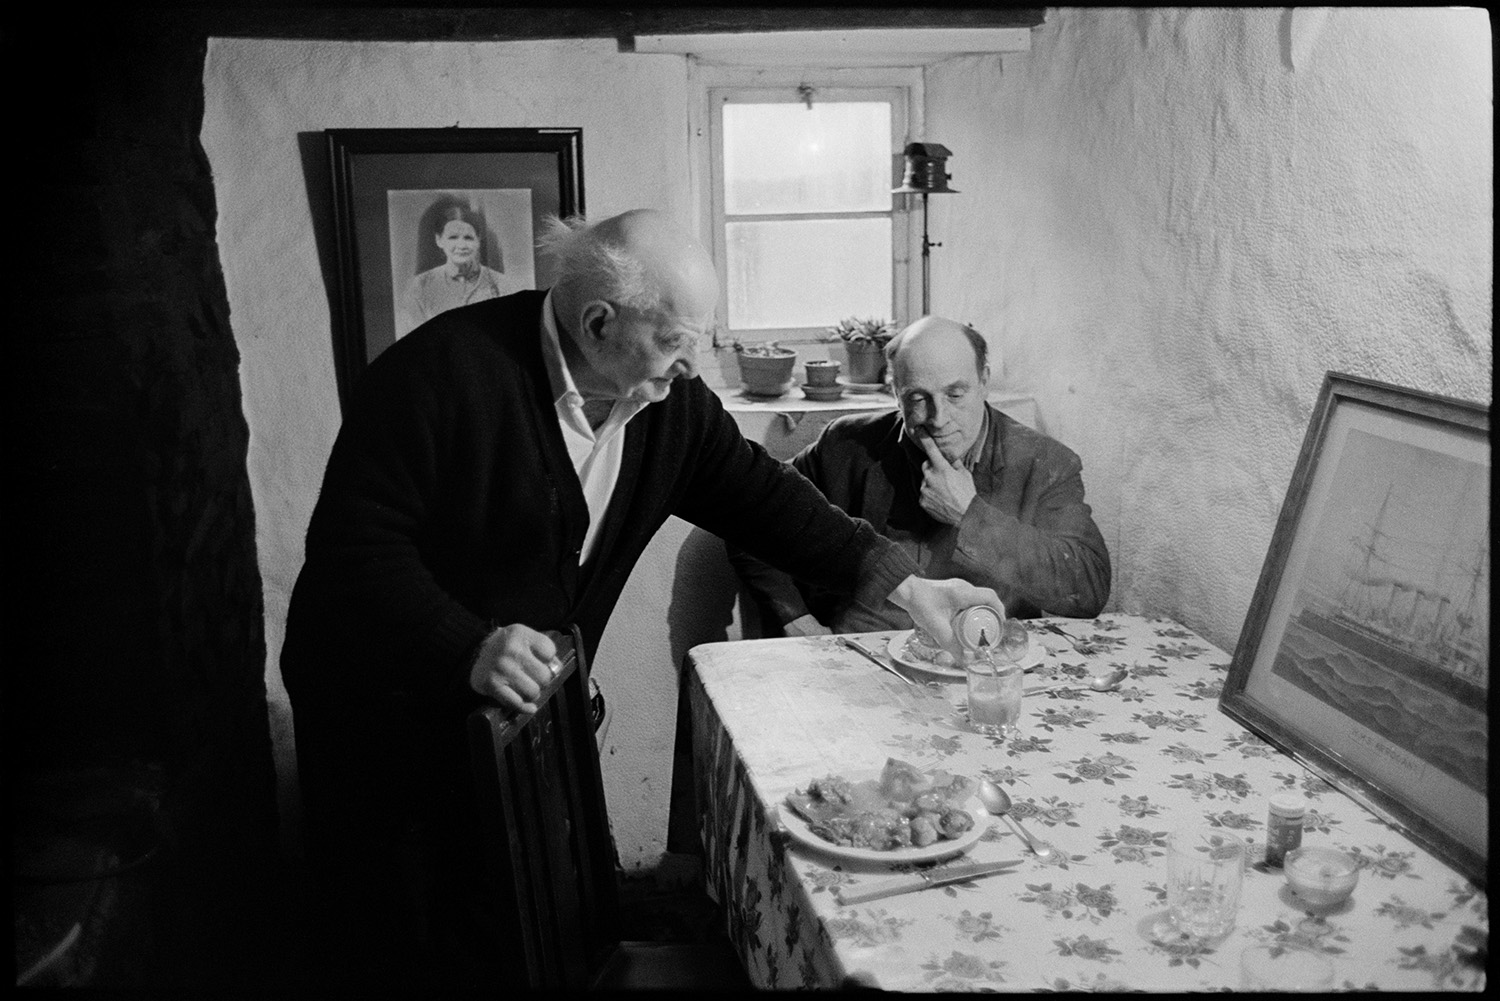 Waiting for Christmas dinner. Woman cooking turkey. Rayburn stove, carving turkey, eating. 
[Archie Parkhouse and another man sitting down to eat their roast turkey Christmas dinner at Horseshoe Cottage, Dolton on Christmas Day. Archie Parkhouse is pouring a drink and a picture of a ship is on the table.]